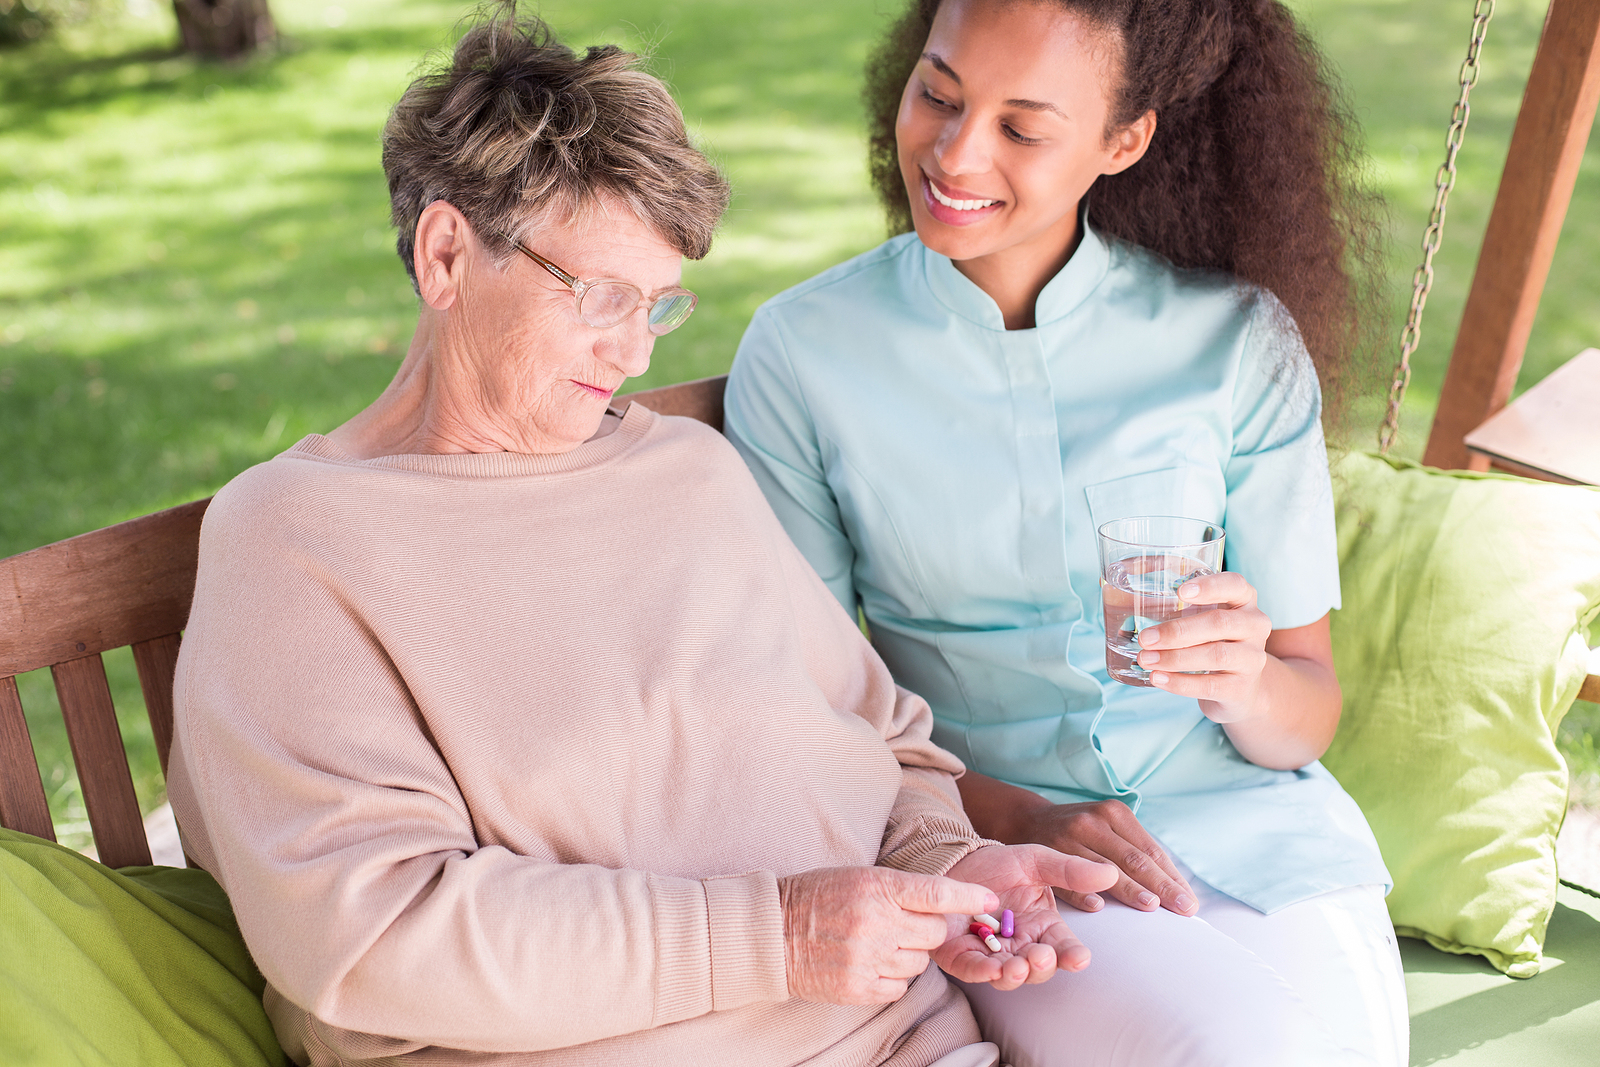 Diabetes Management in Seniors: How Companion Care Can Help